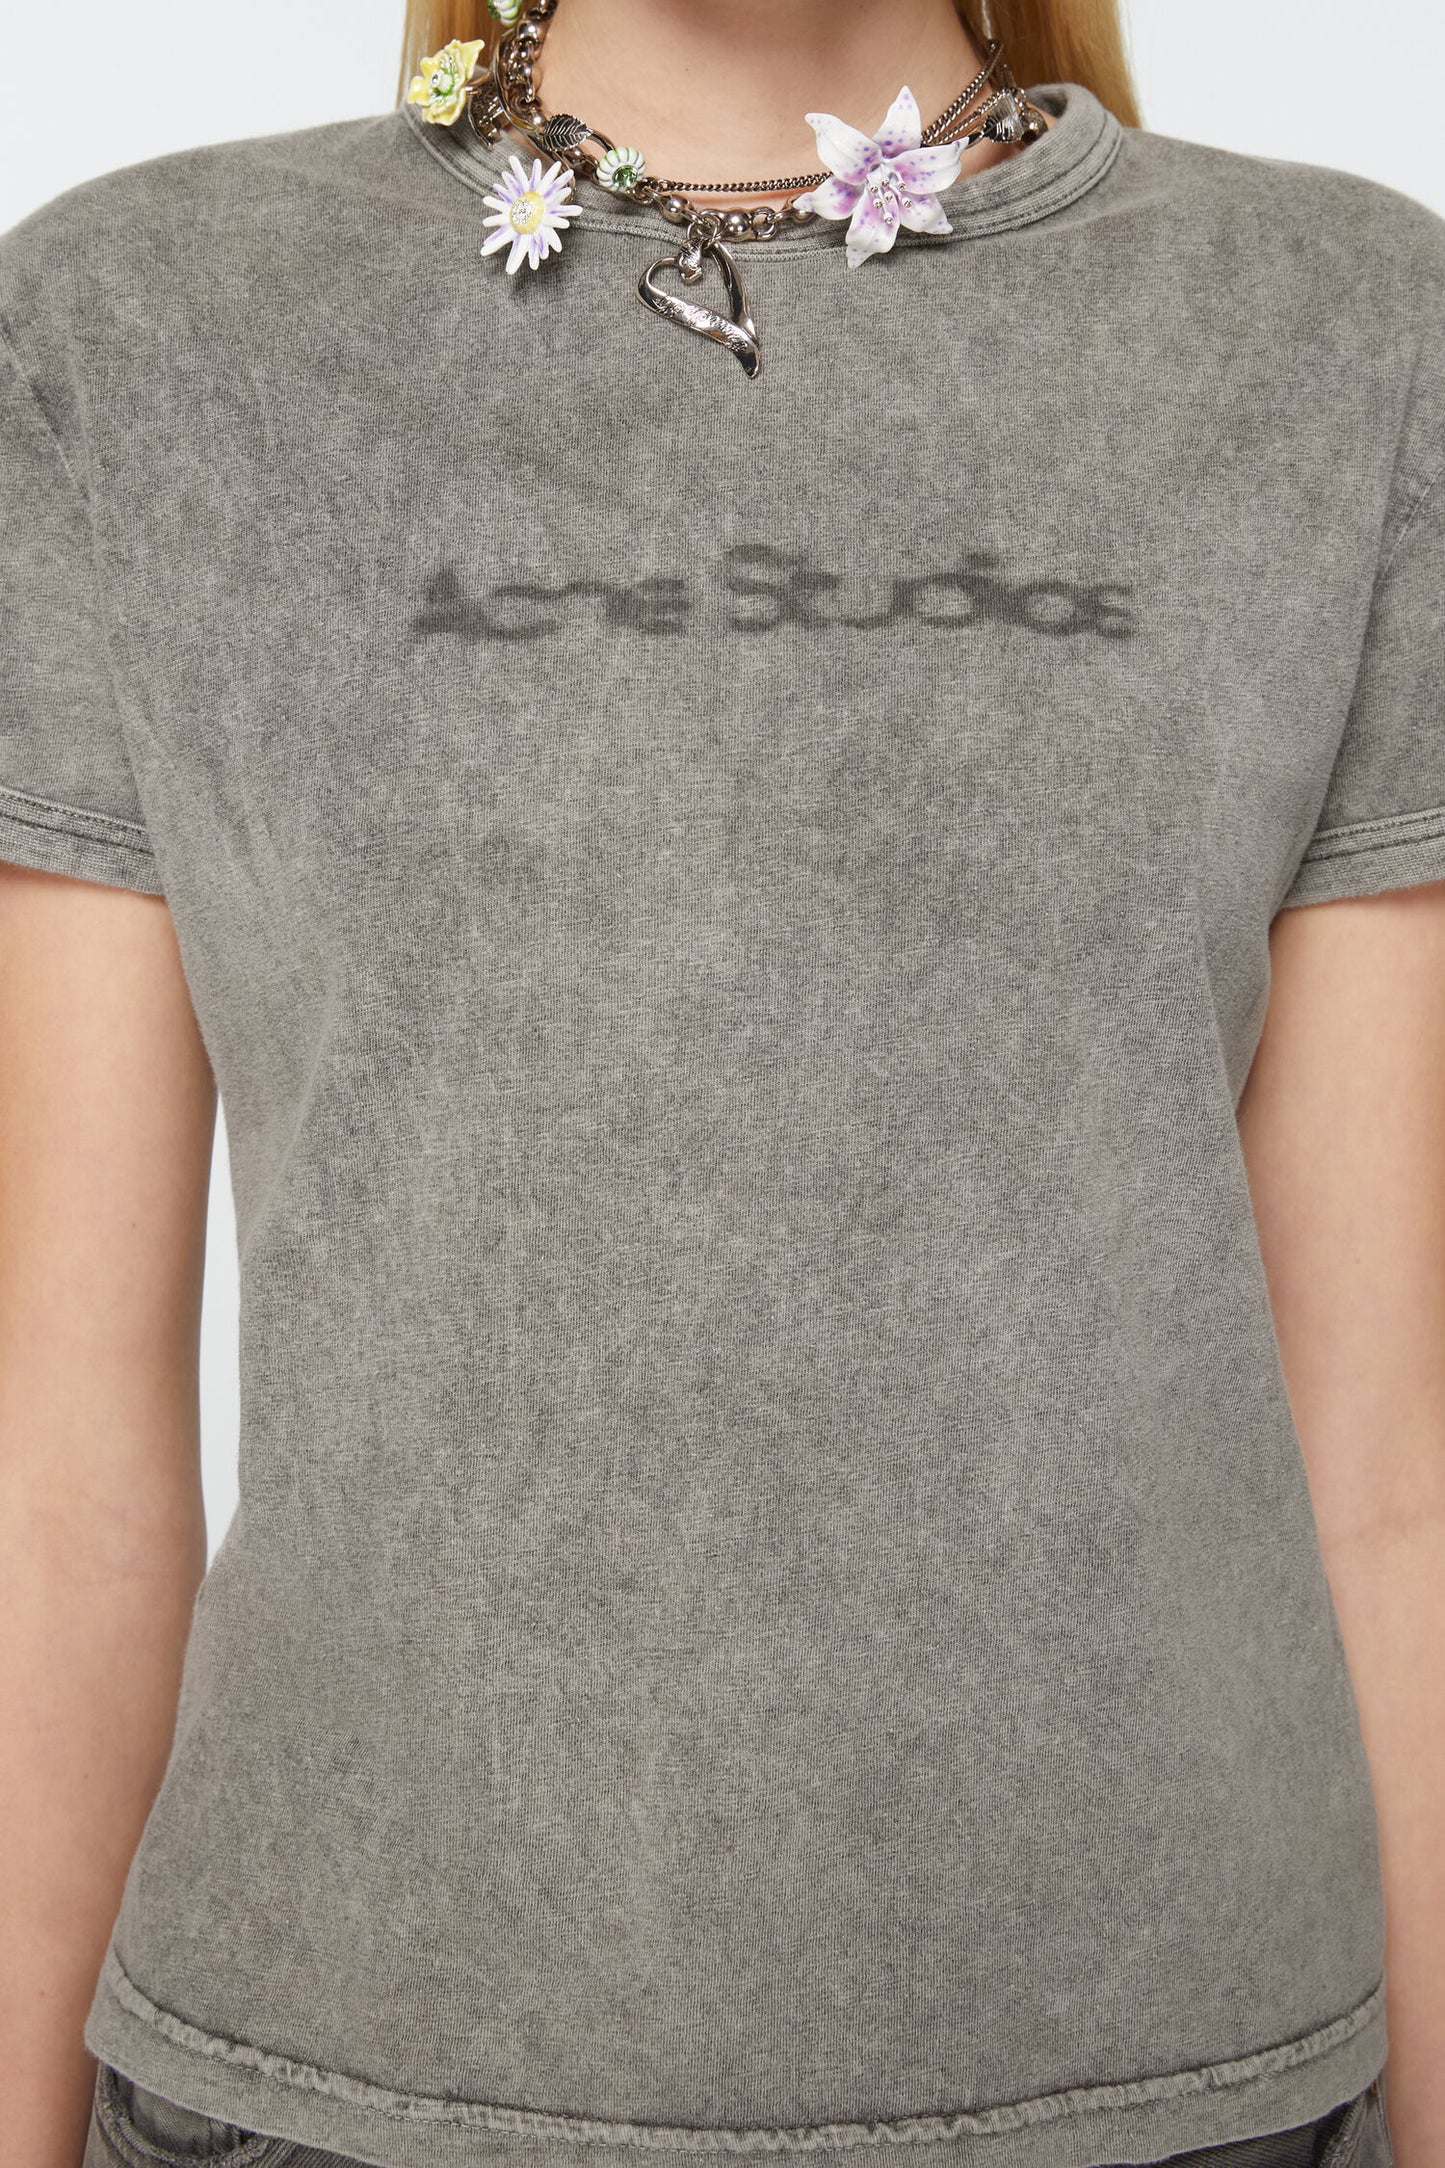 Acne Studios T-shirt Blurred Logo - Fitted Fit